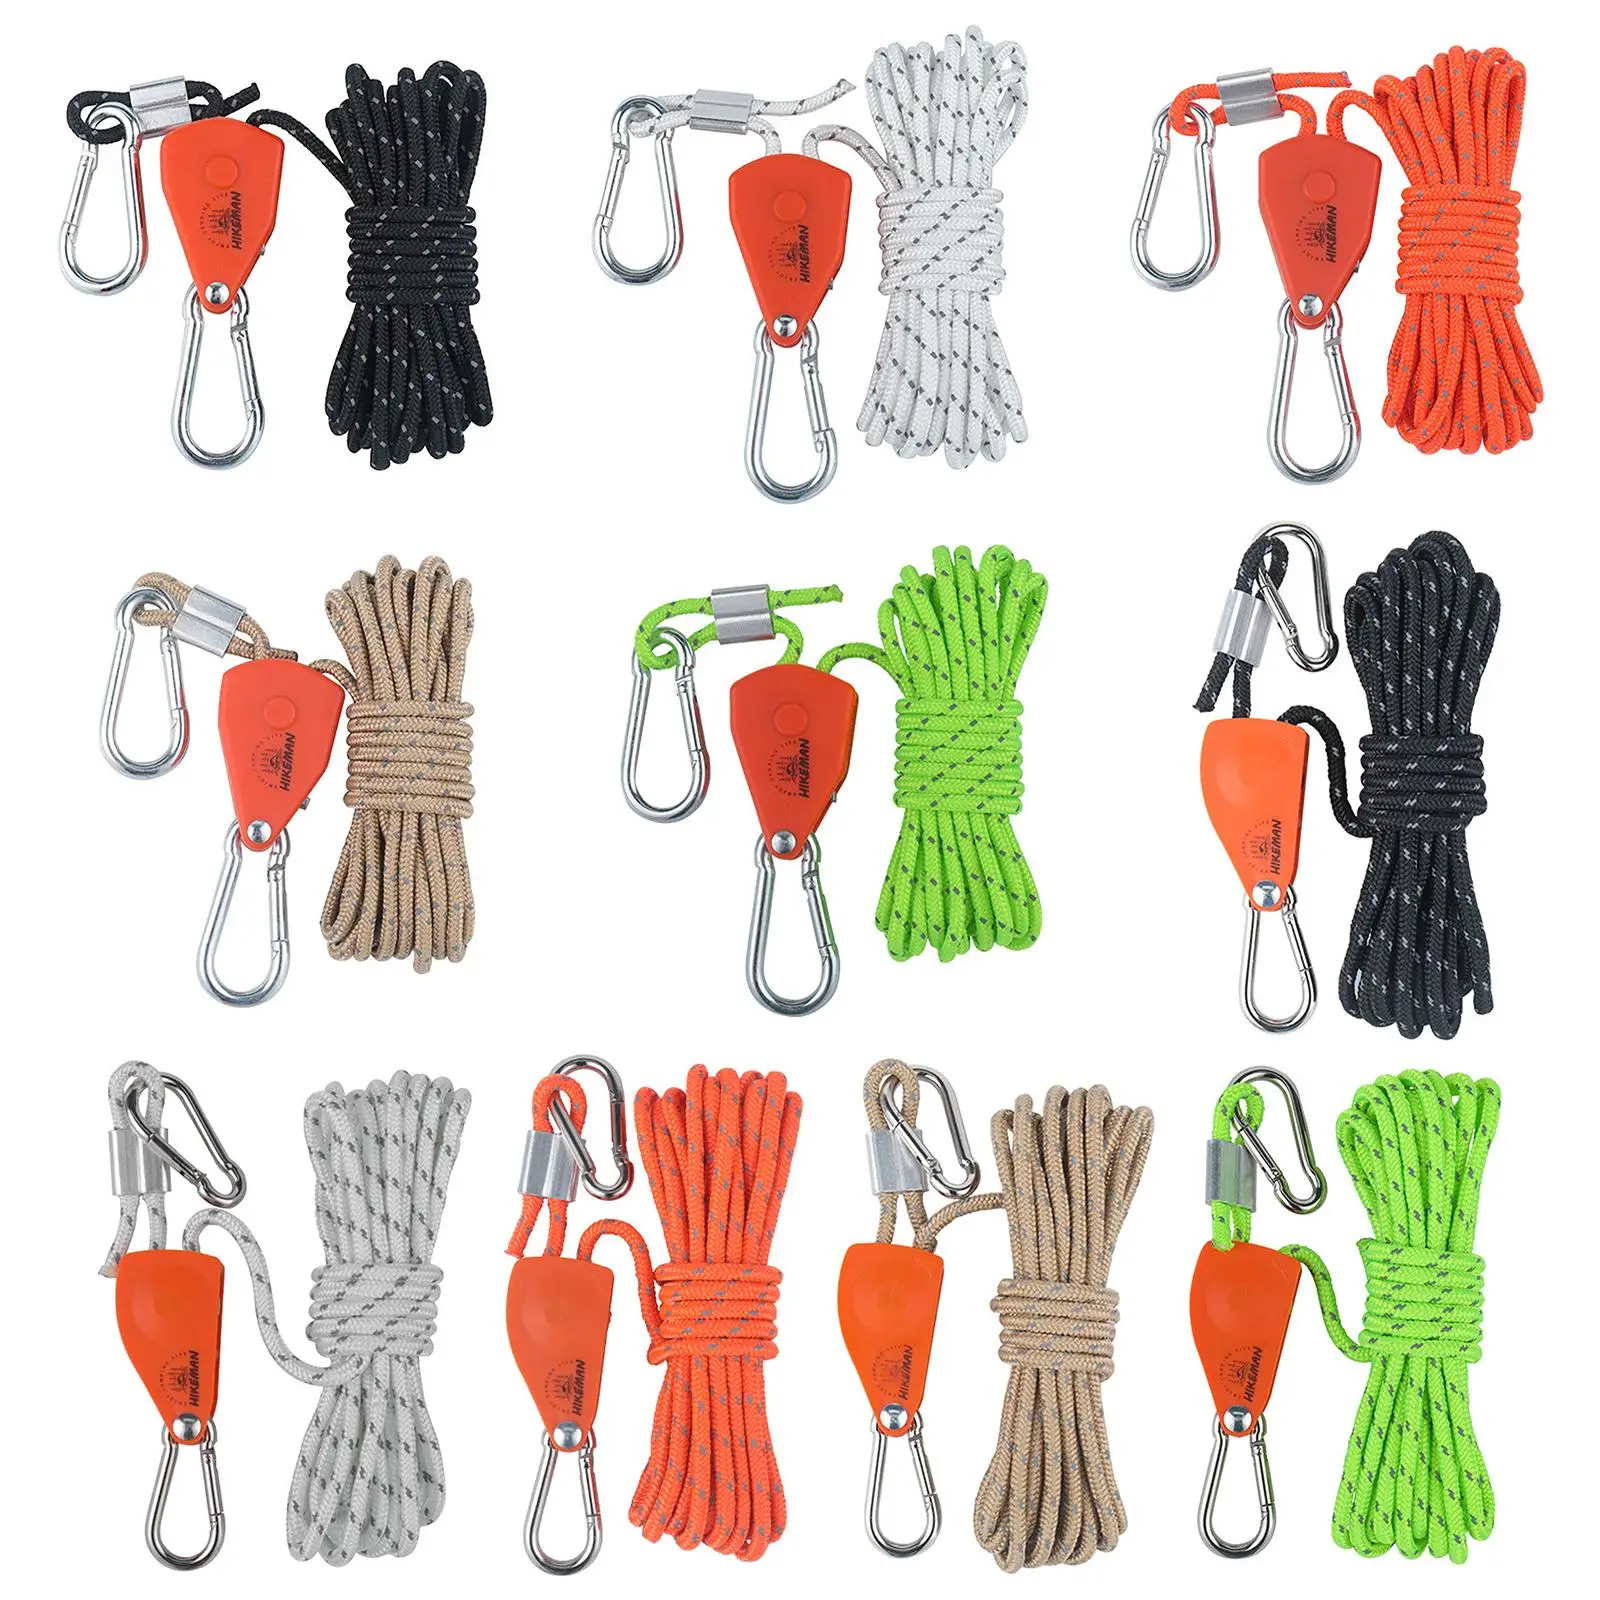 Pulley Ratchet Rope Hanger Grow Light for Camping Hiking Outdoor Backpacks